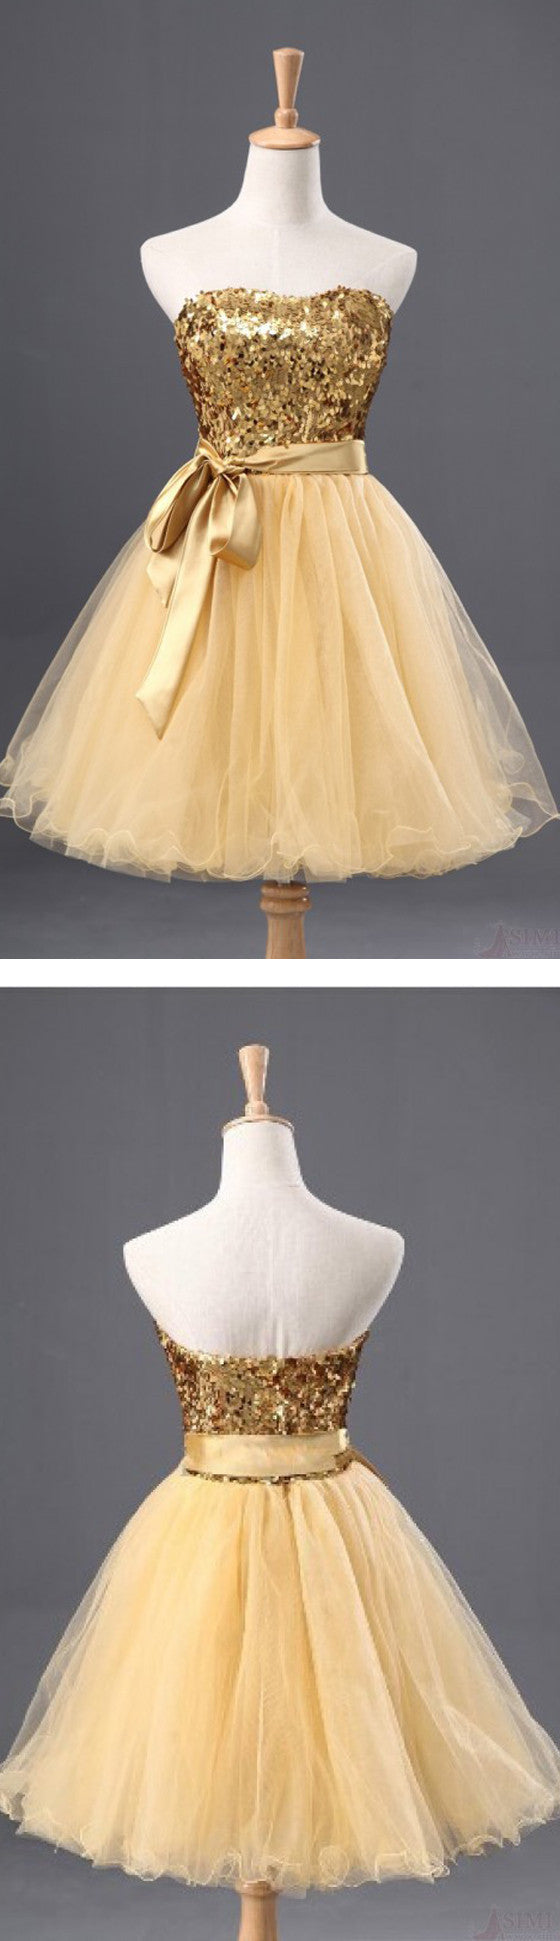 Fashion Gold Sequins Bow Sash Sweetheart Strapless Short Cute Homecoming Dresses, CM0029